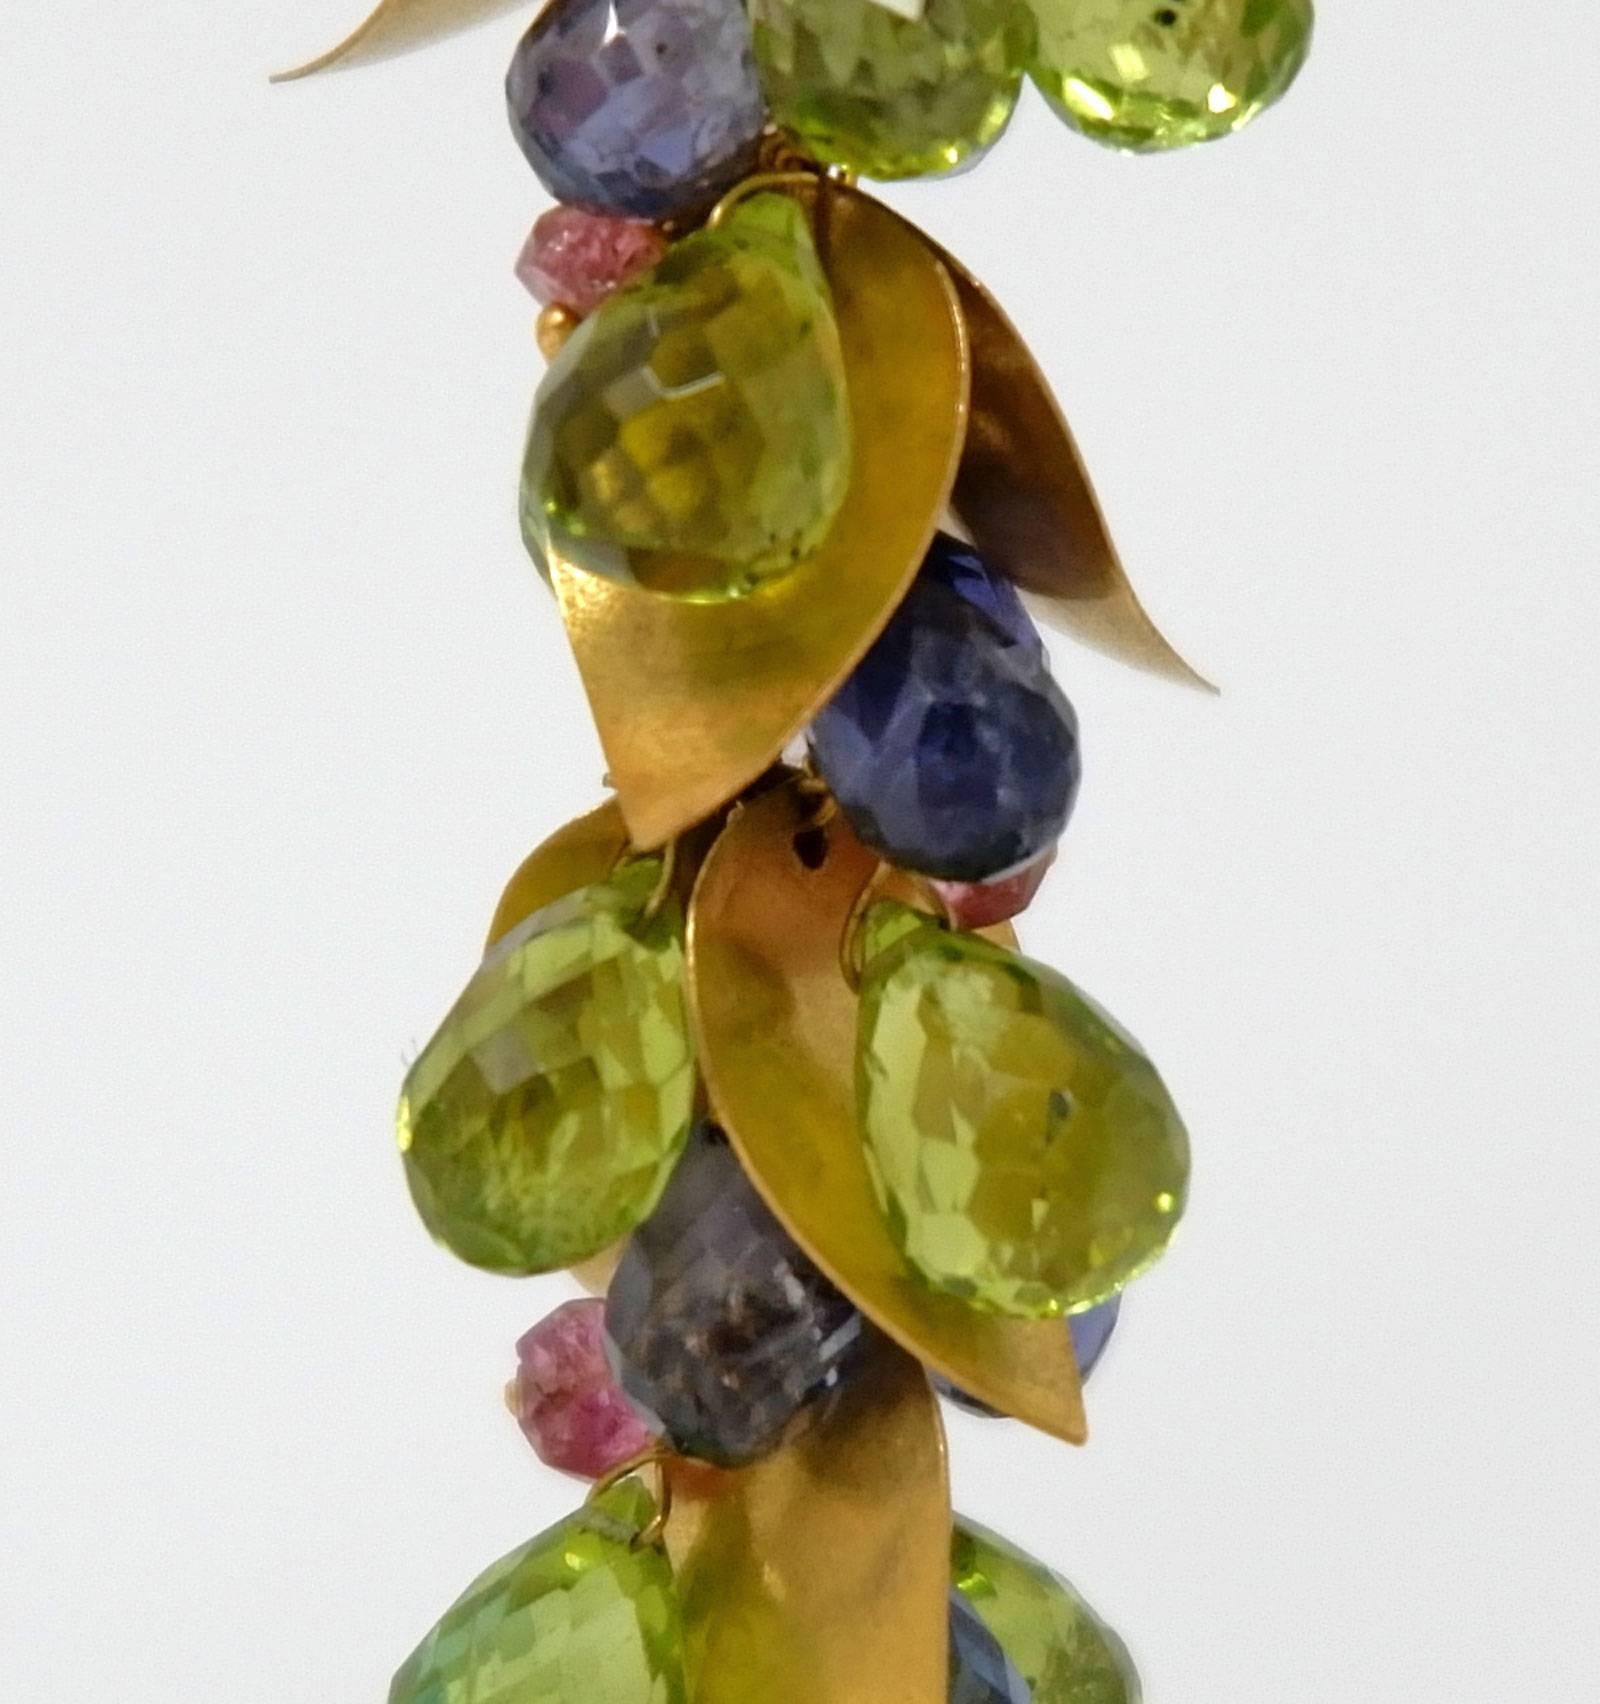 A pair of delicate hand crafted earrings with two large topaz briolettes which are suspended below a cluster of  gorgeous faceted beads consisting of peridots, iolites, tourmalines and 18 Karat matte gold leaves. Wear these jewels easily day as well